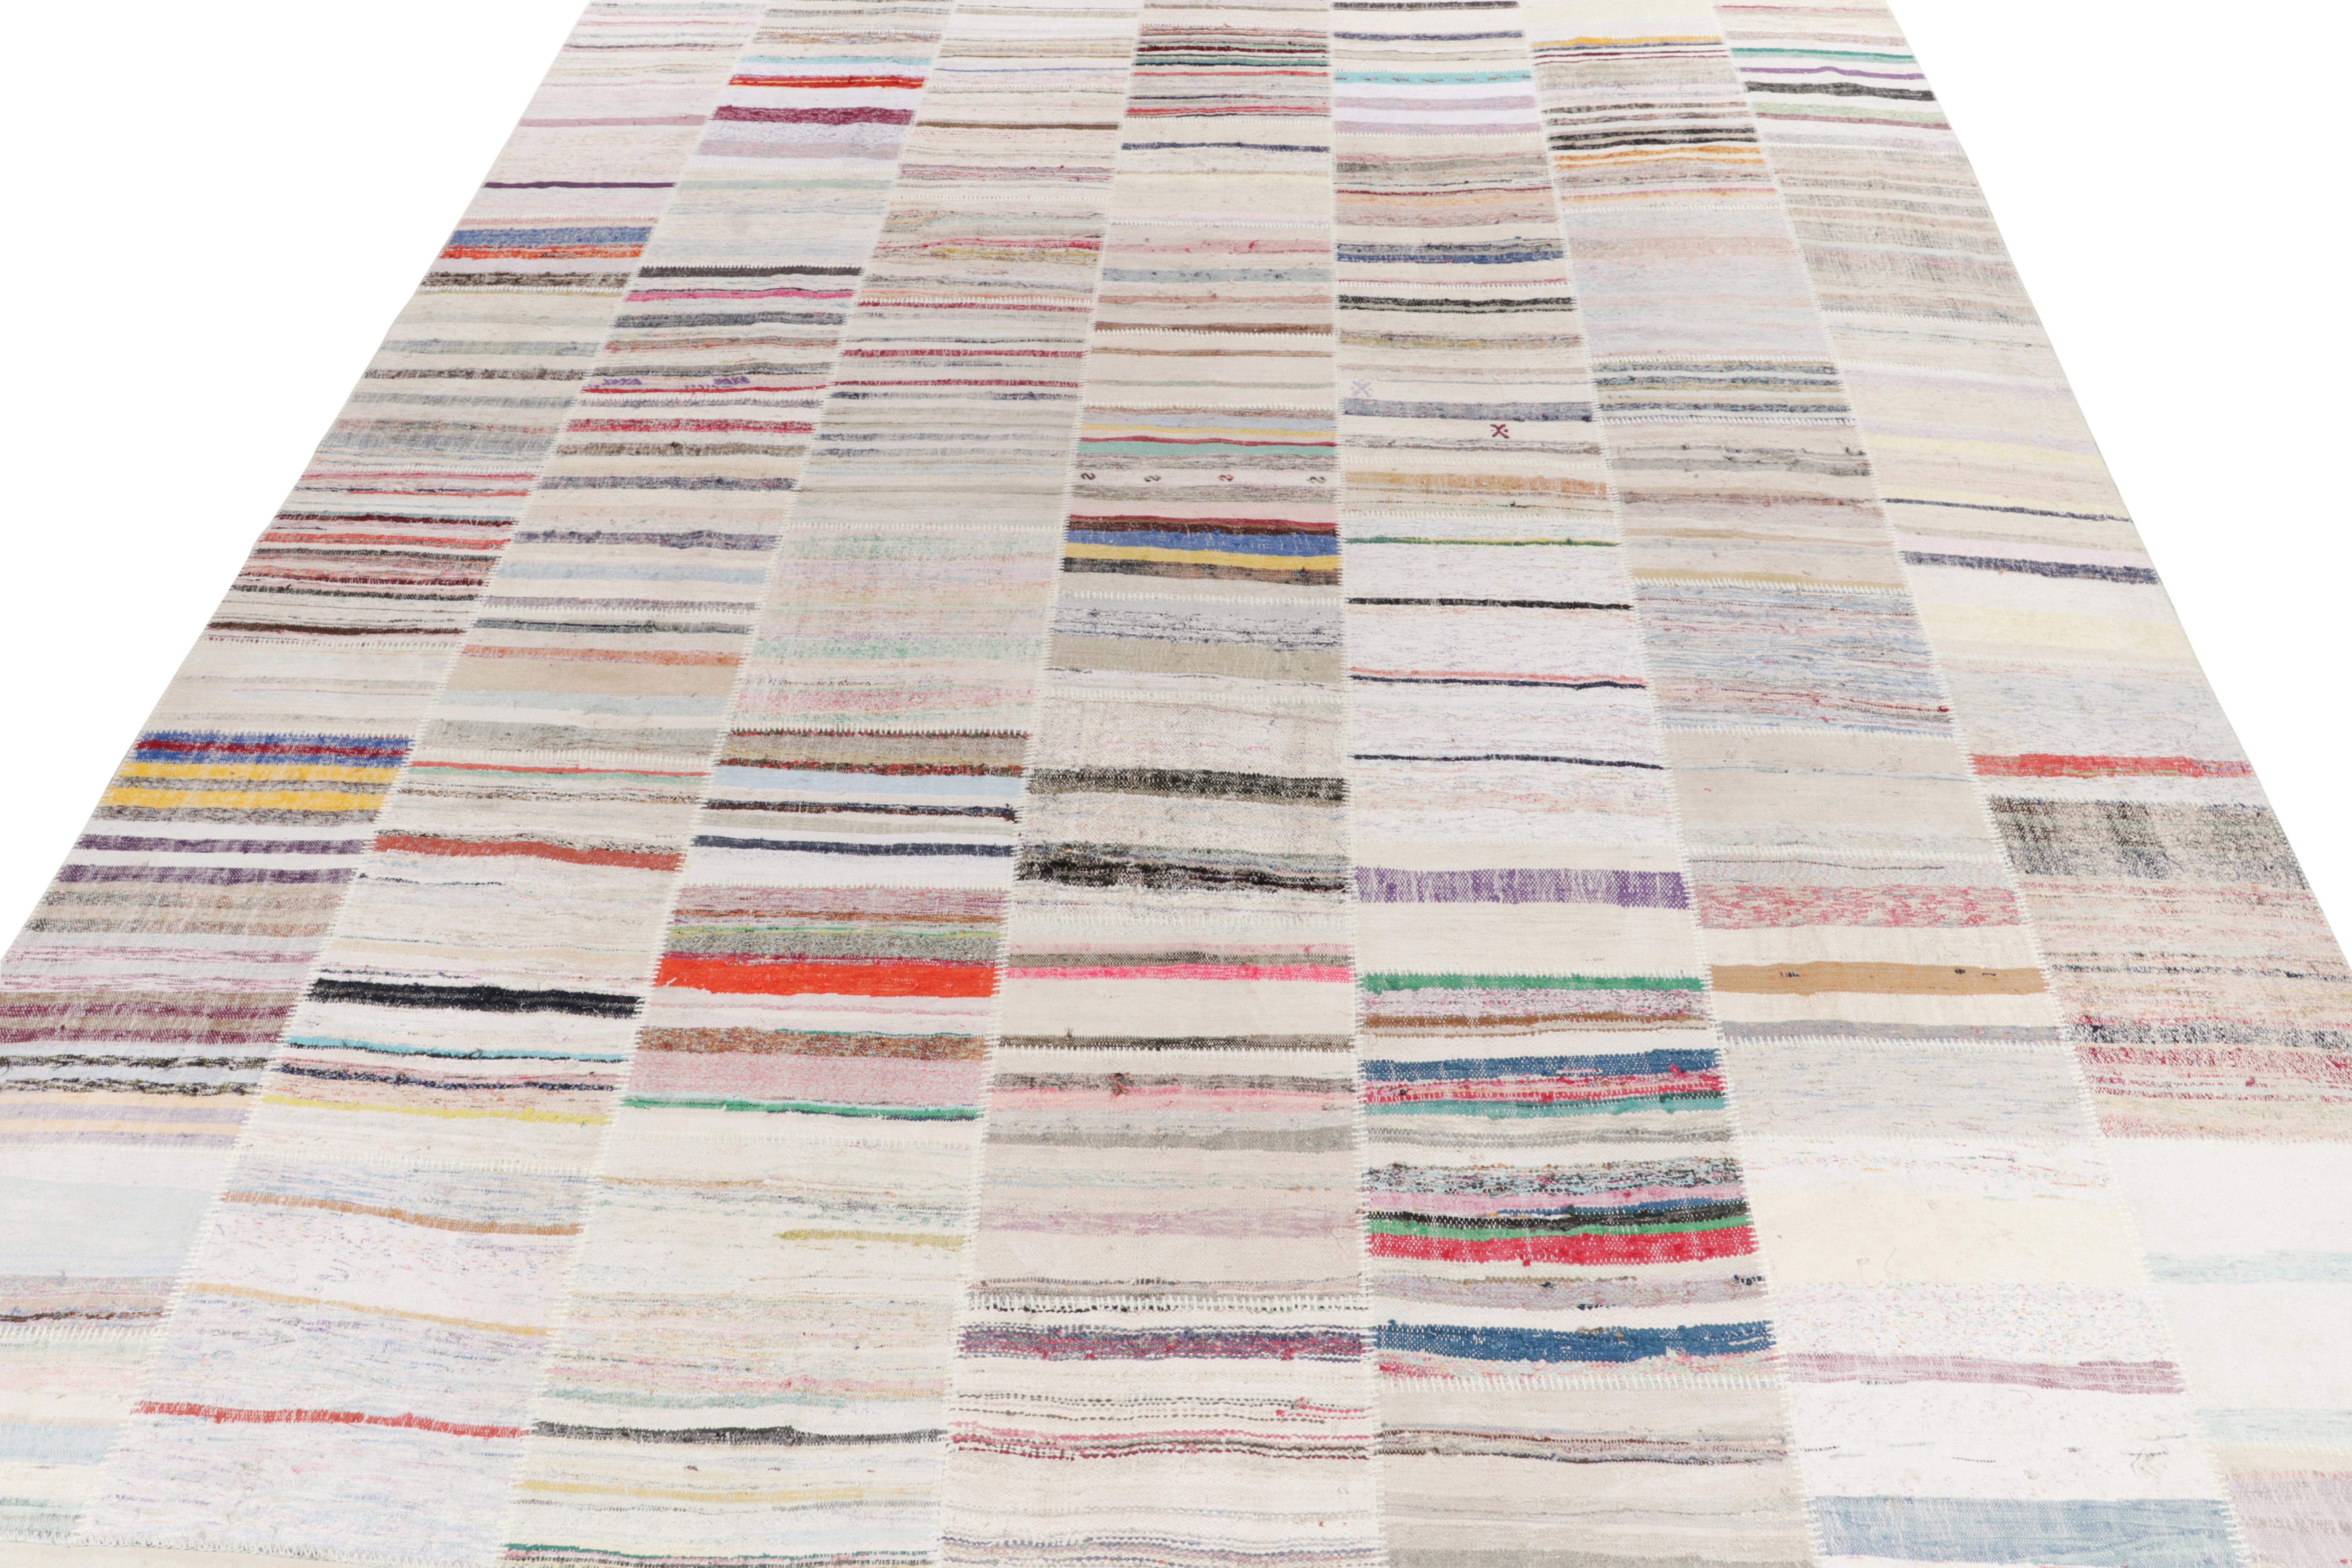 Rug & Kilim takes pride in presenting its artistic vision of patchwork kilim that reimagines vintage yarns into unique pieces of art. This 12x15 flatweave features a striated pattern that lends a smooth sense of movement in variegated shades across